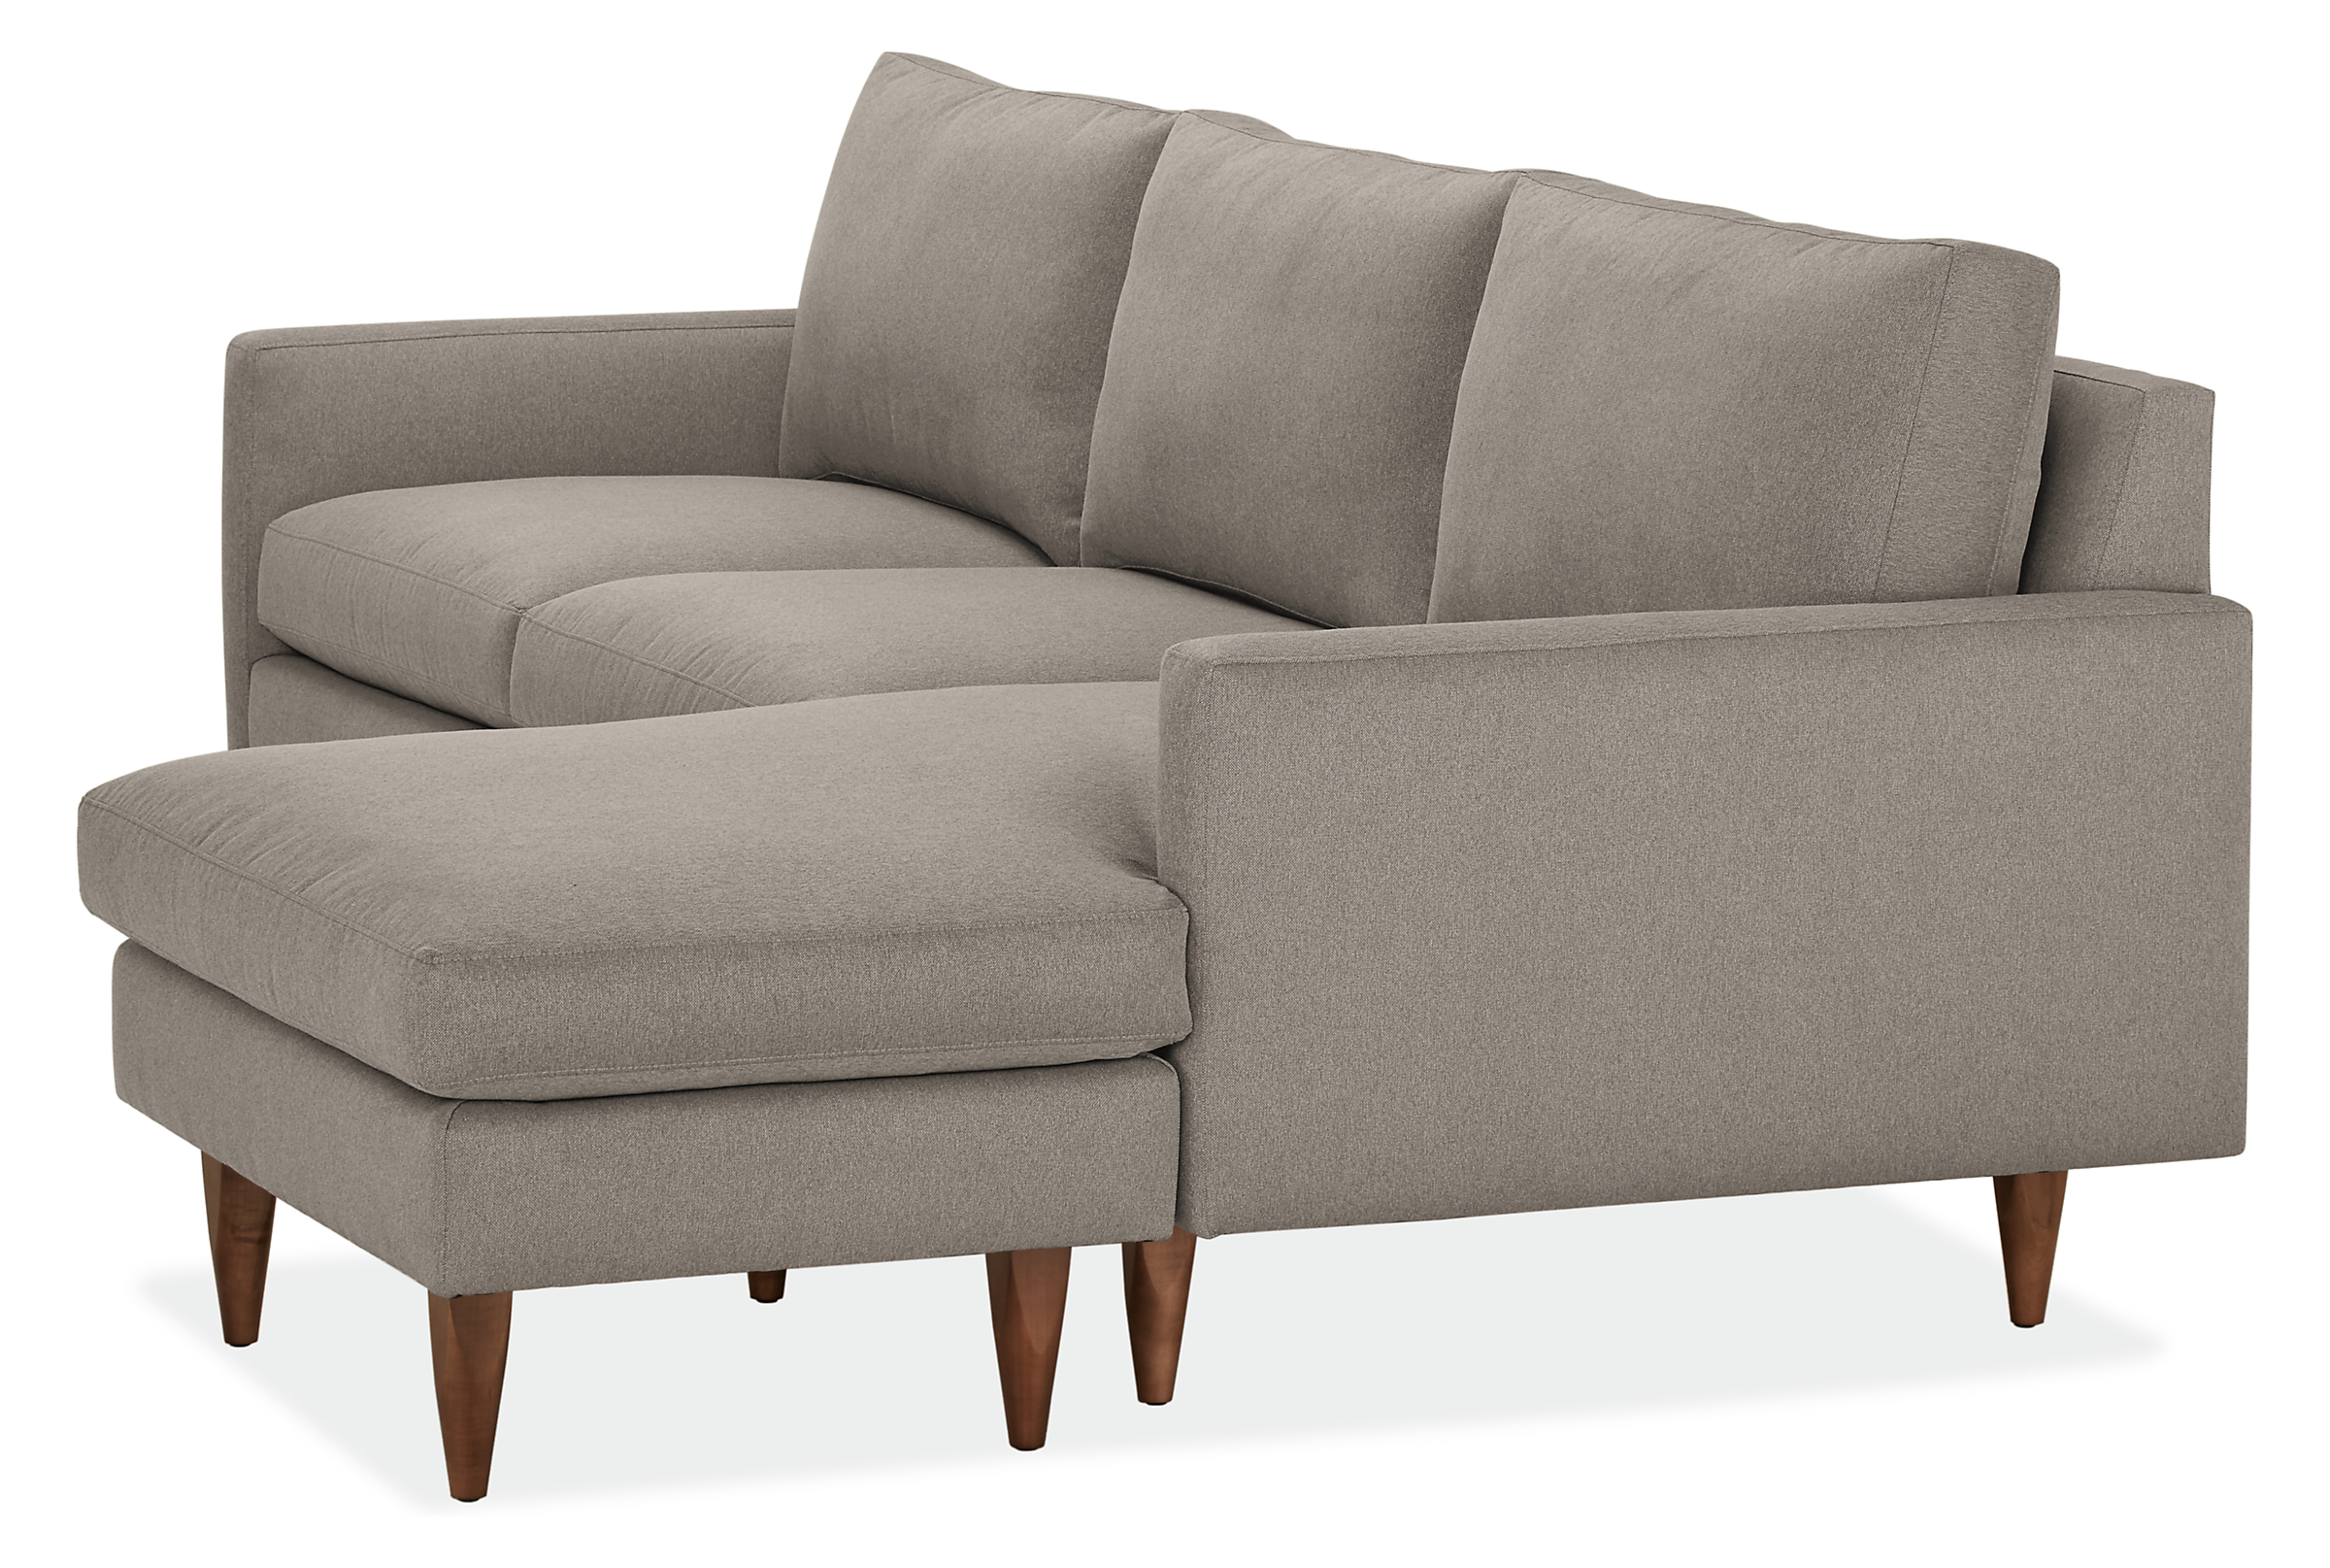 Detail of Jasper 96-wide Sofa with Reversible Chaise in Dawson Cement Fabric.